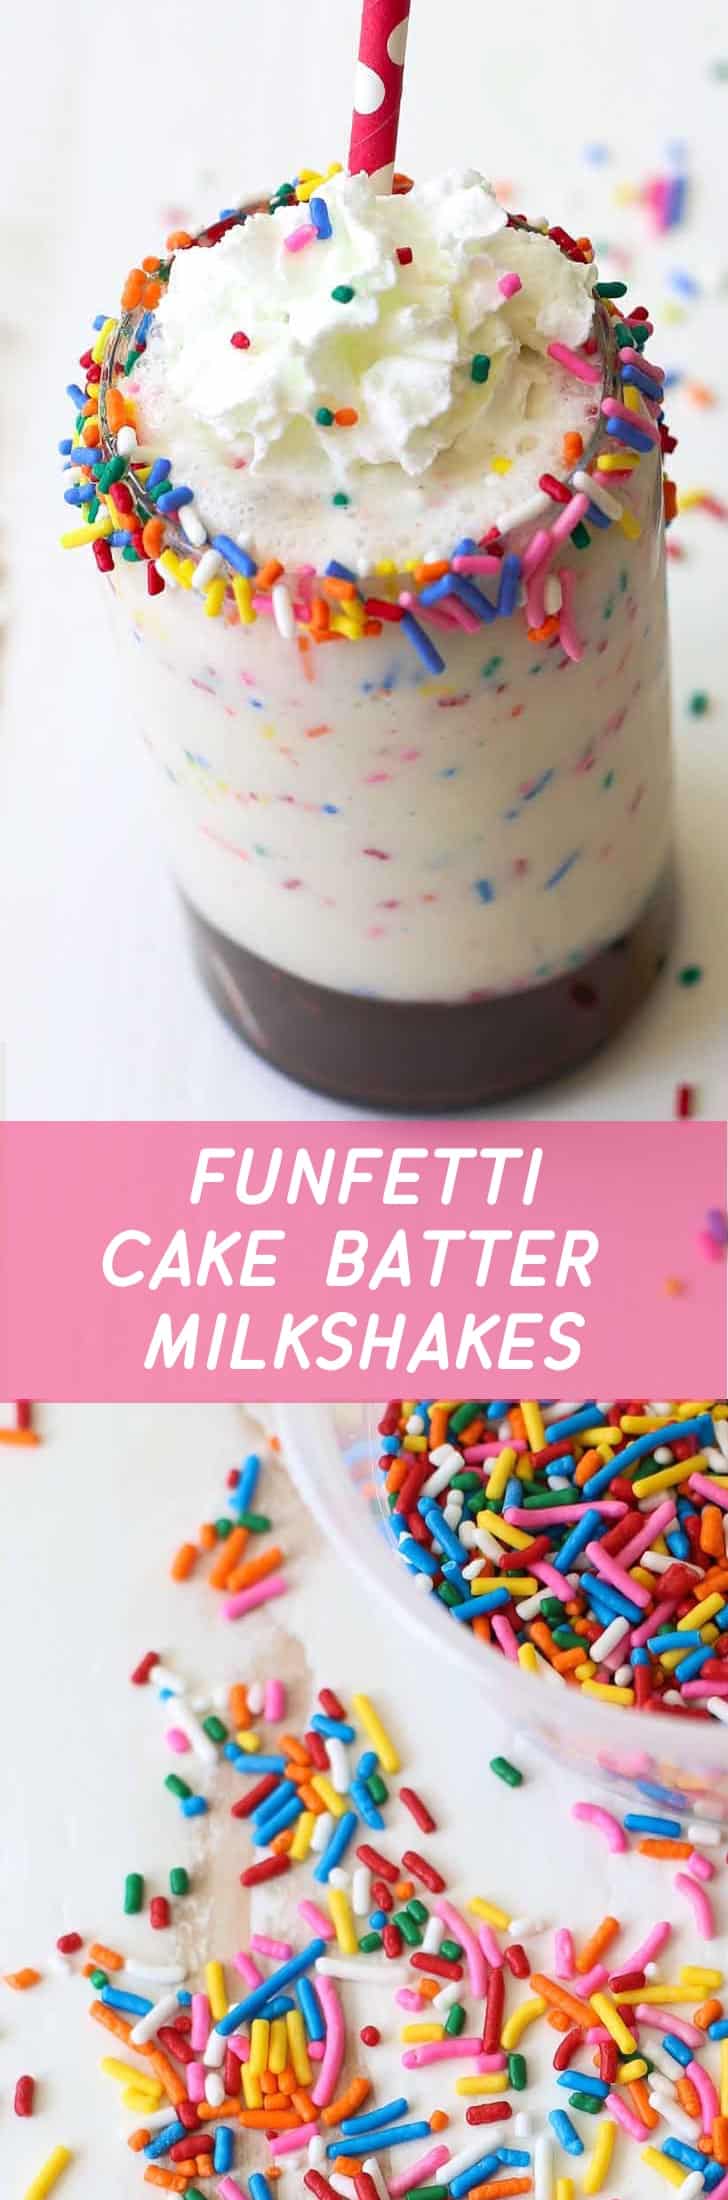 With all the flavor of cake batter, a swirl of hot fudge and loads of sprinkles, these milkshakes are even better than licking the bowl after making a funfetti cake.